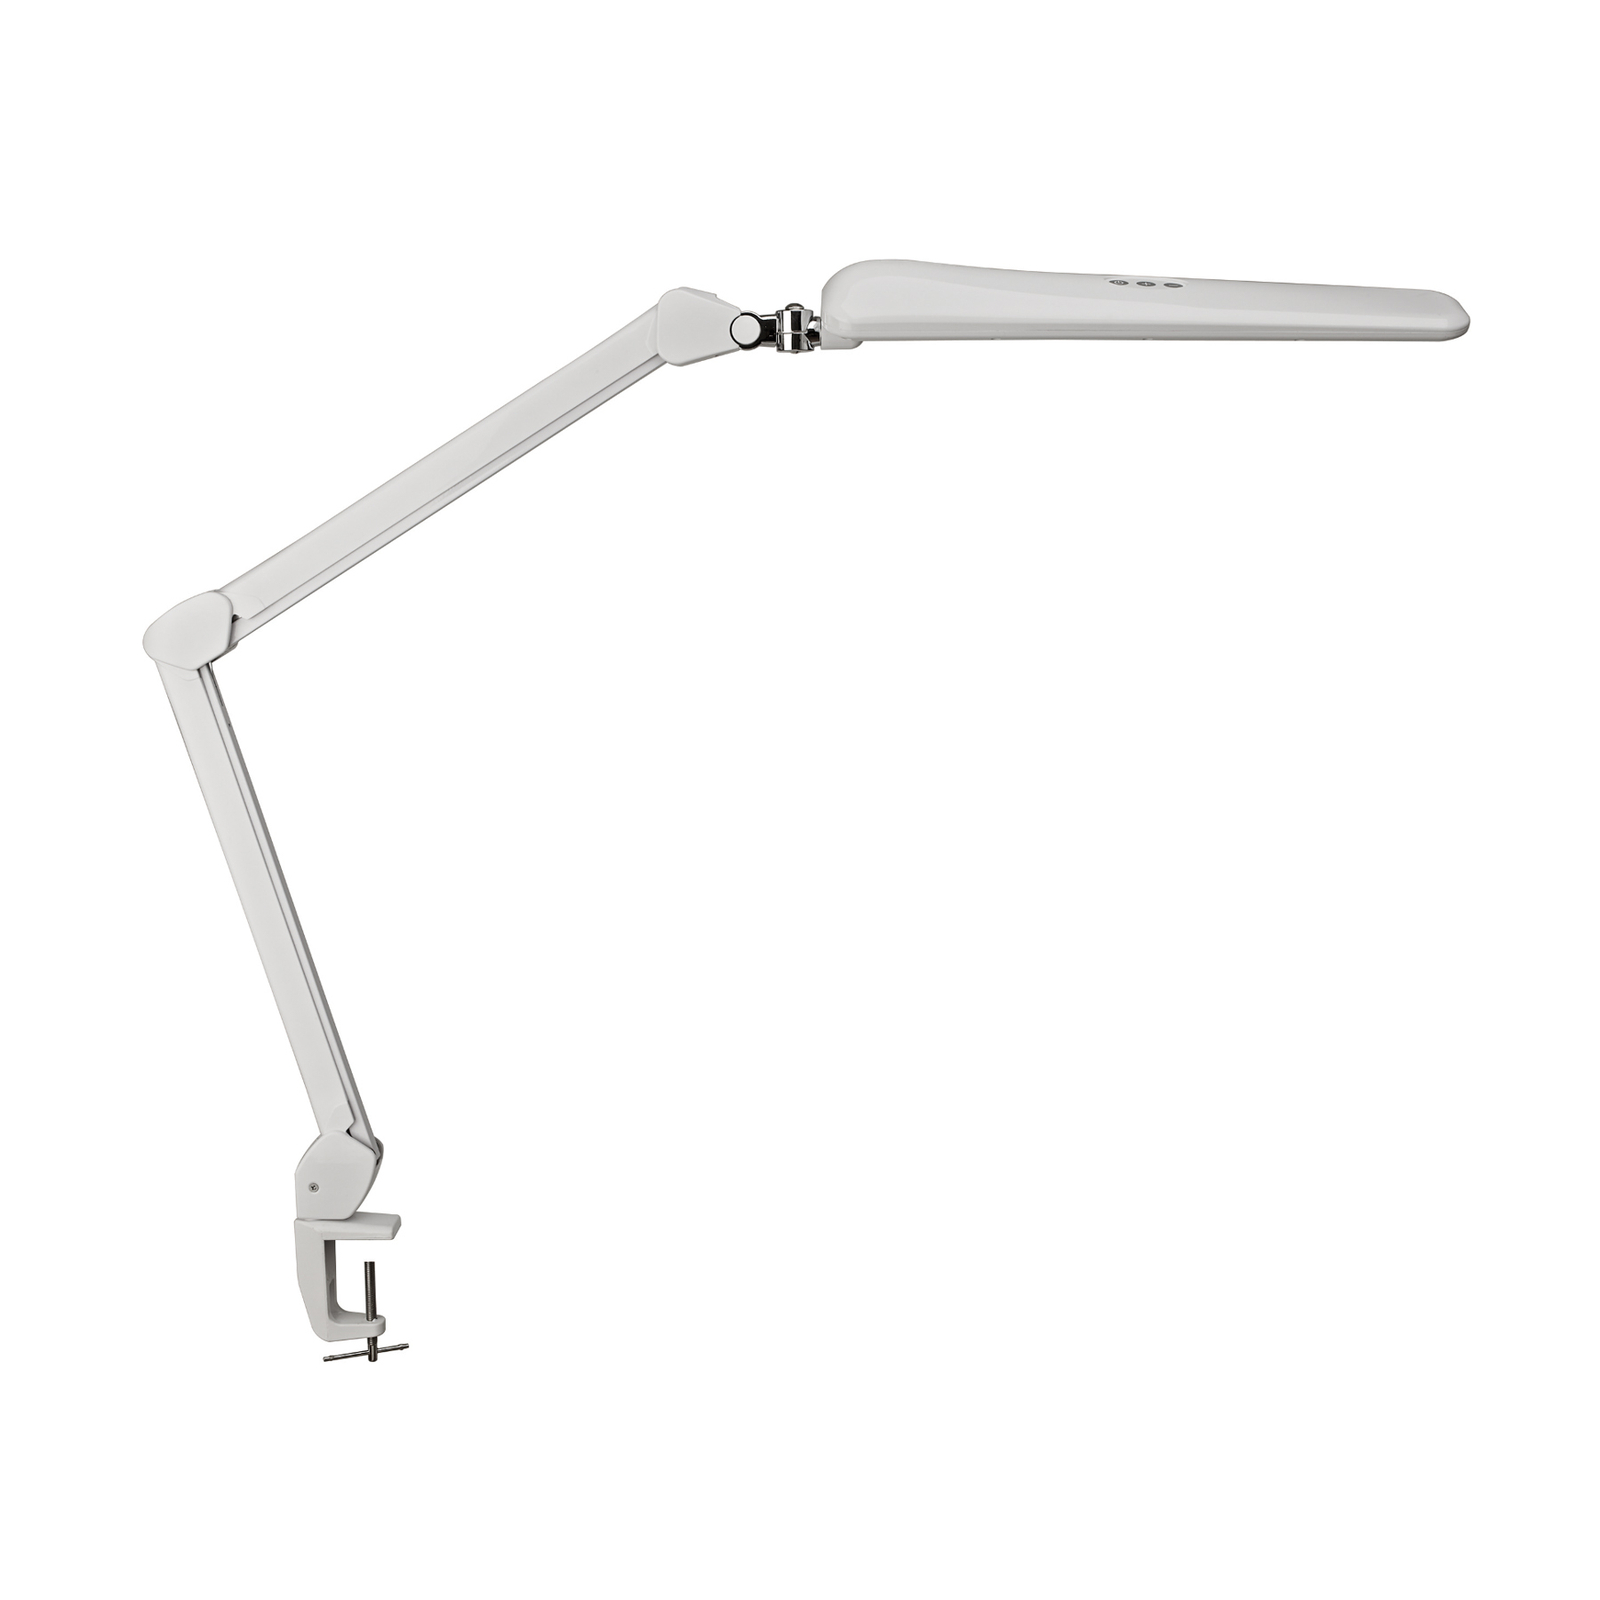 Lampe à poser LED MAULcraft pied pince, dimmable